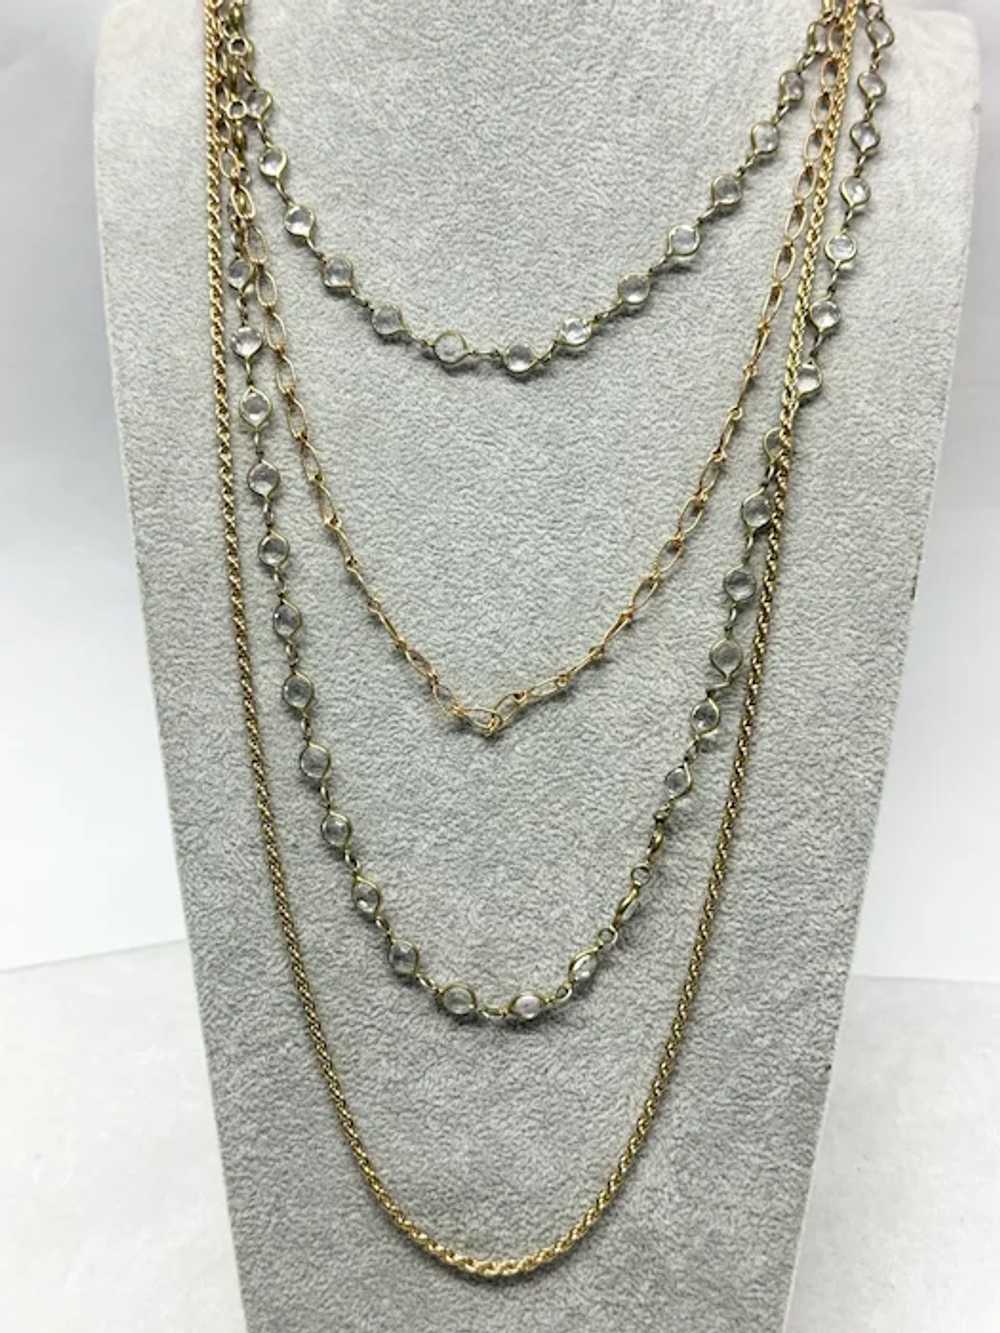 Vintage multi chain crystal necklace - image 4